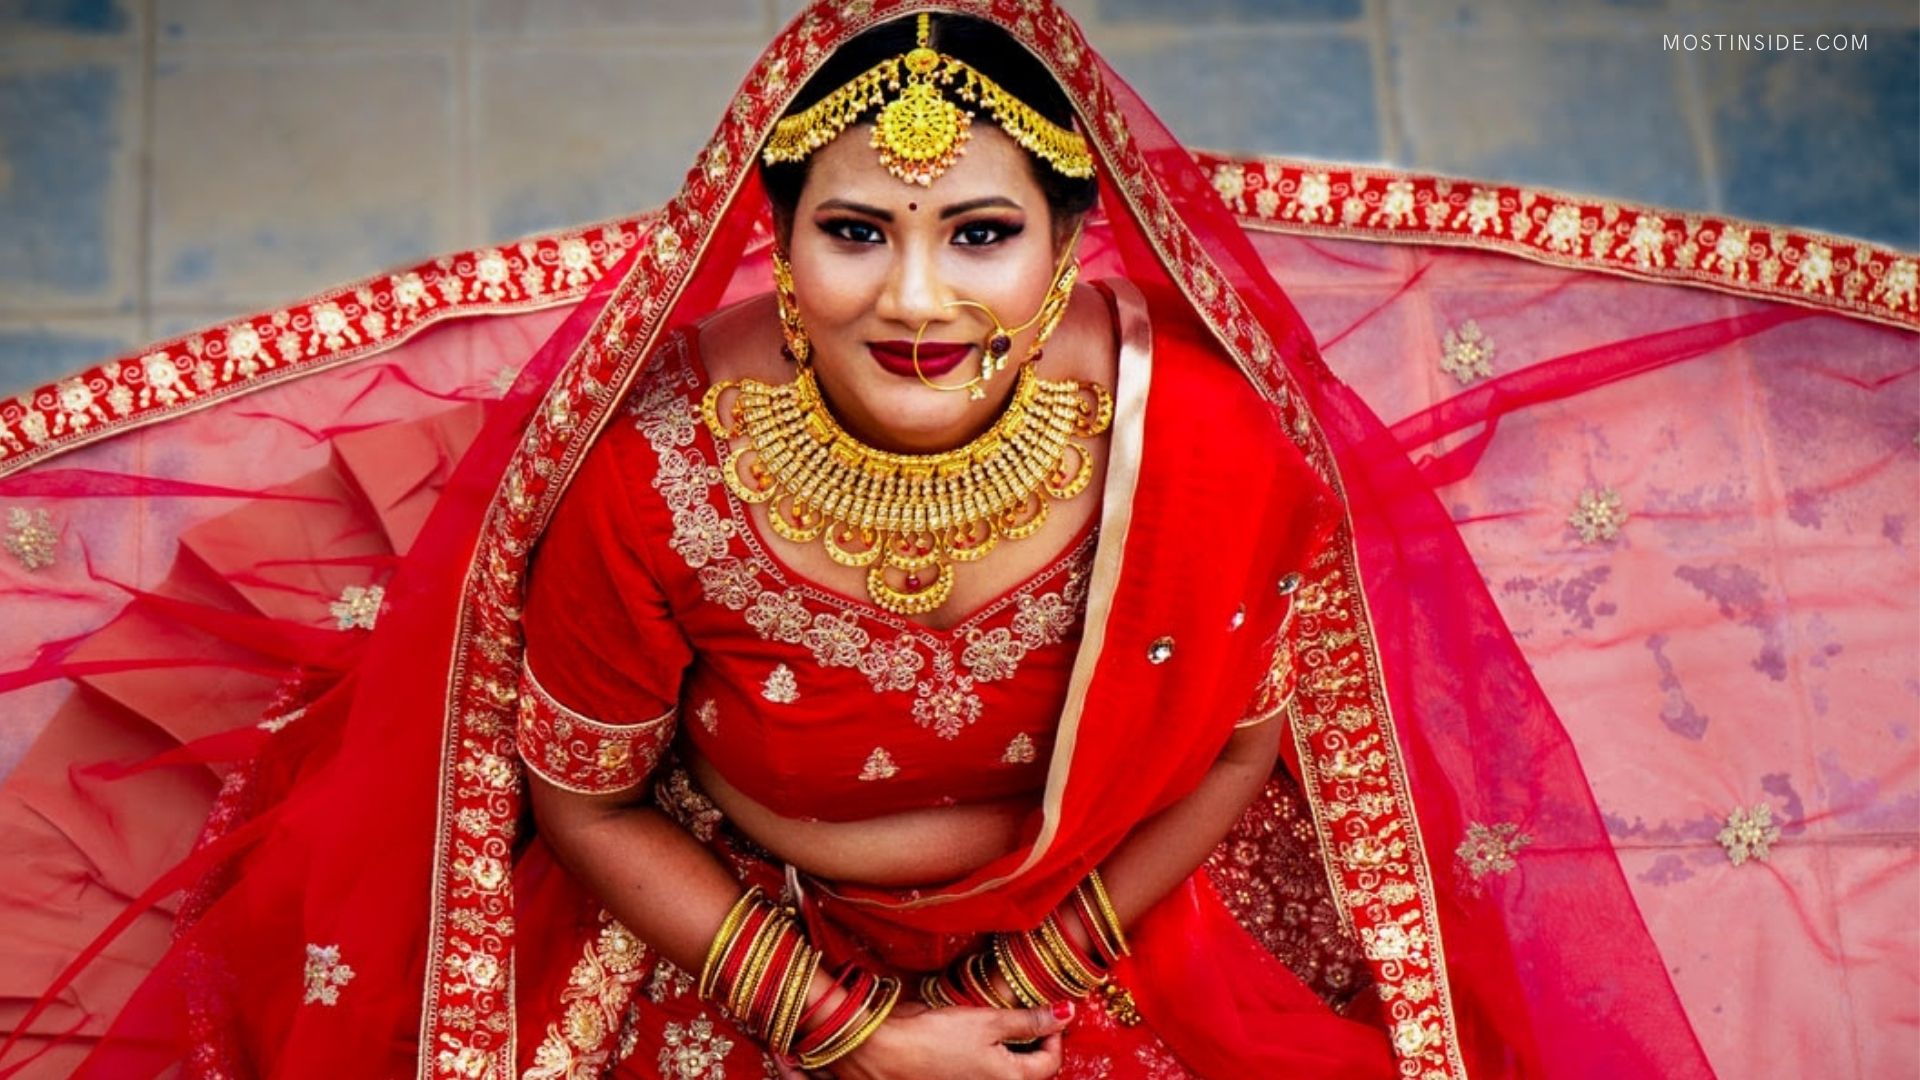 How To Prepare for a Hindu Wedding